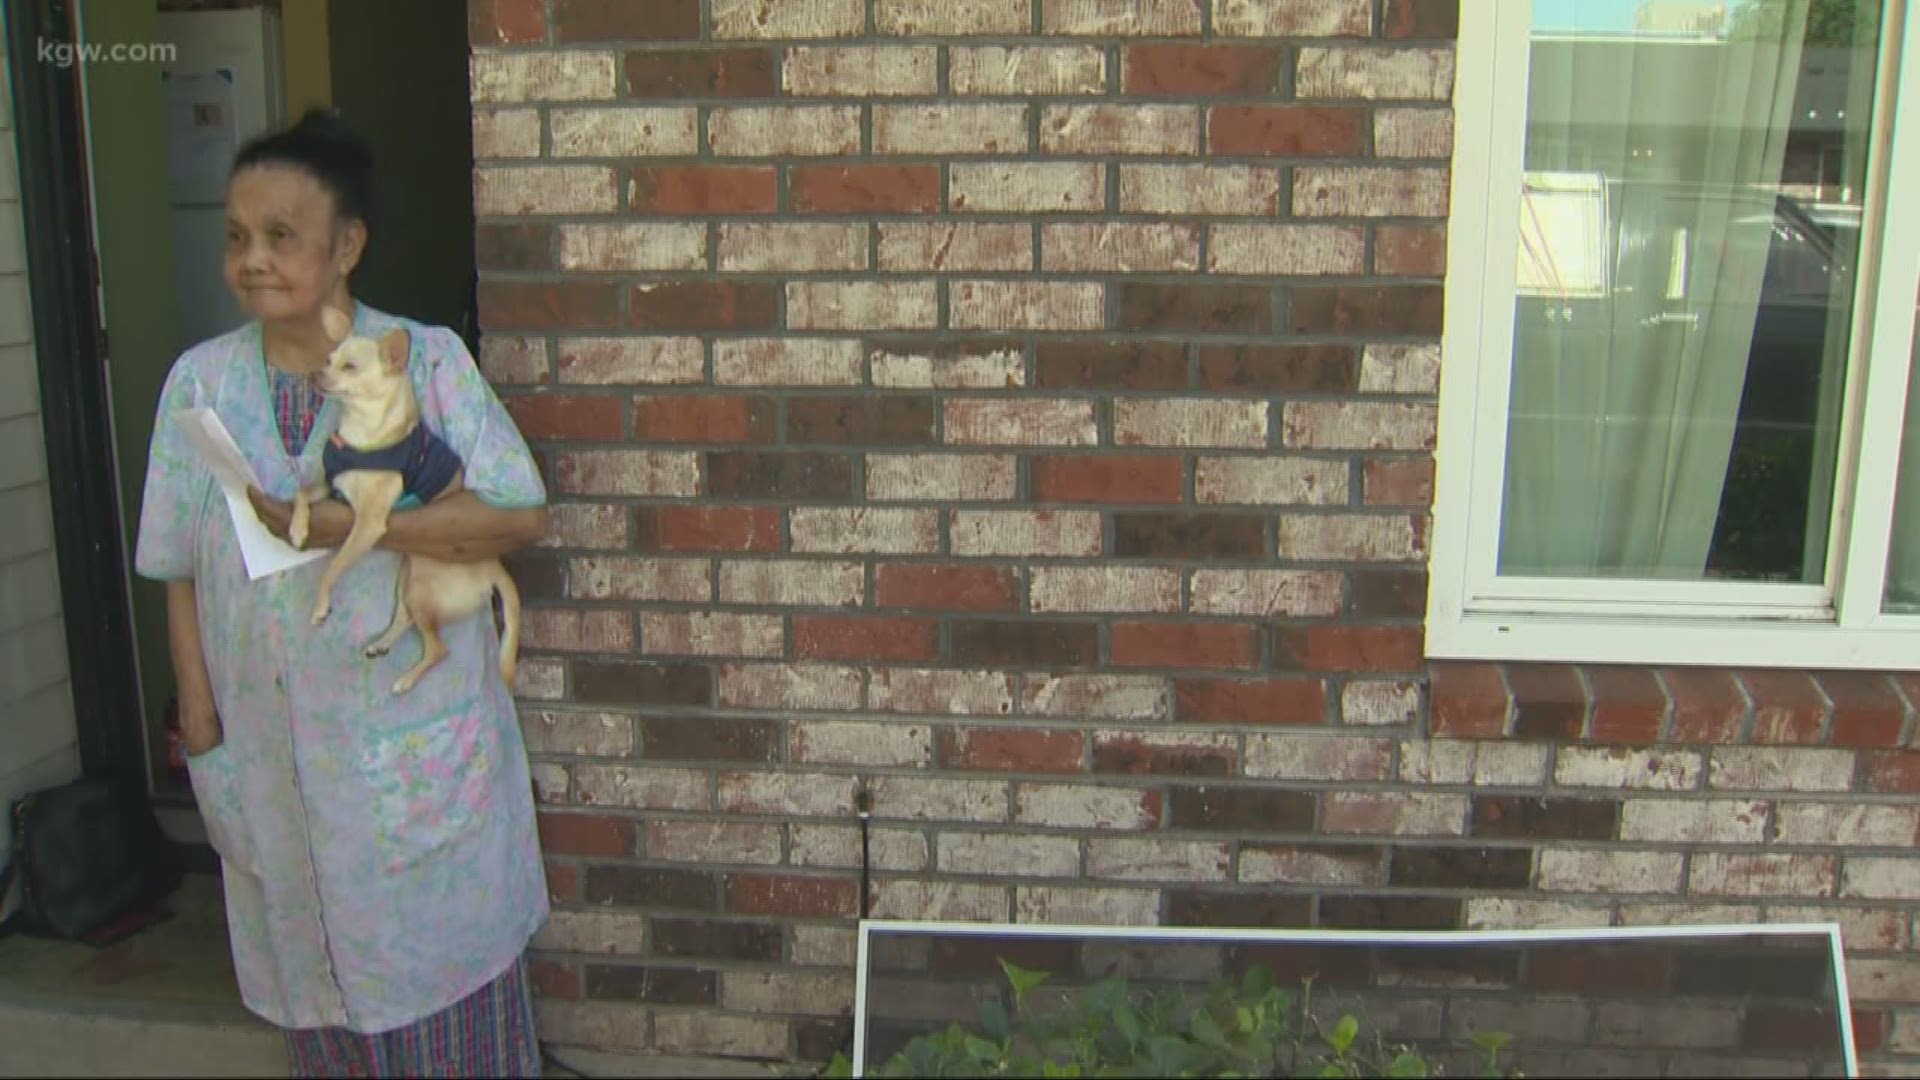 An 84-year-old Portland woman won’t be evicted from her apartment after all.